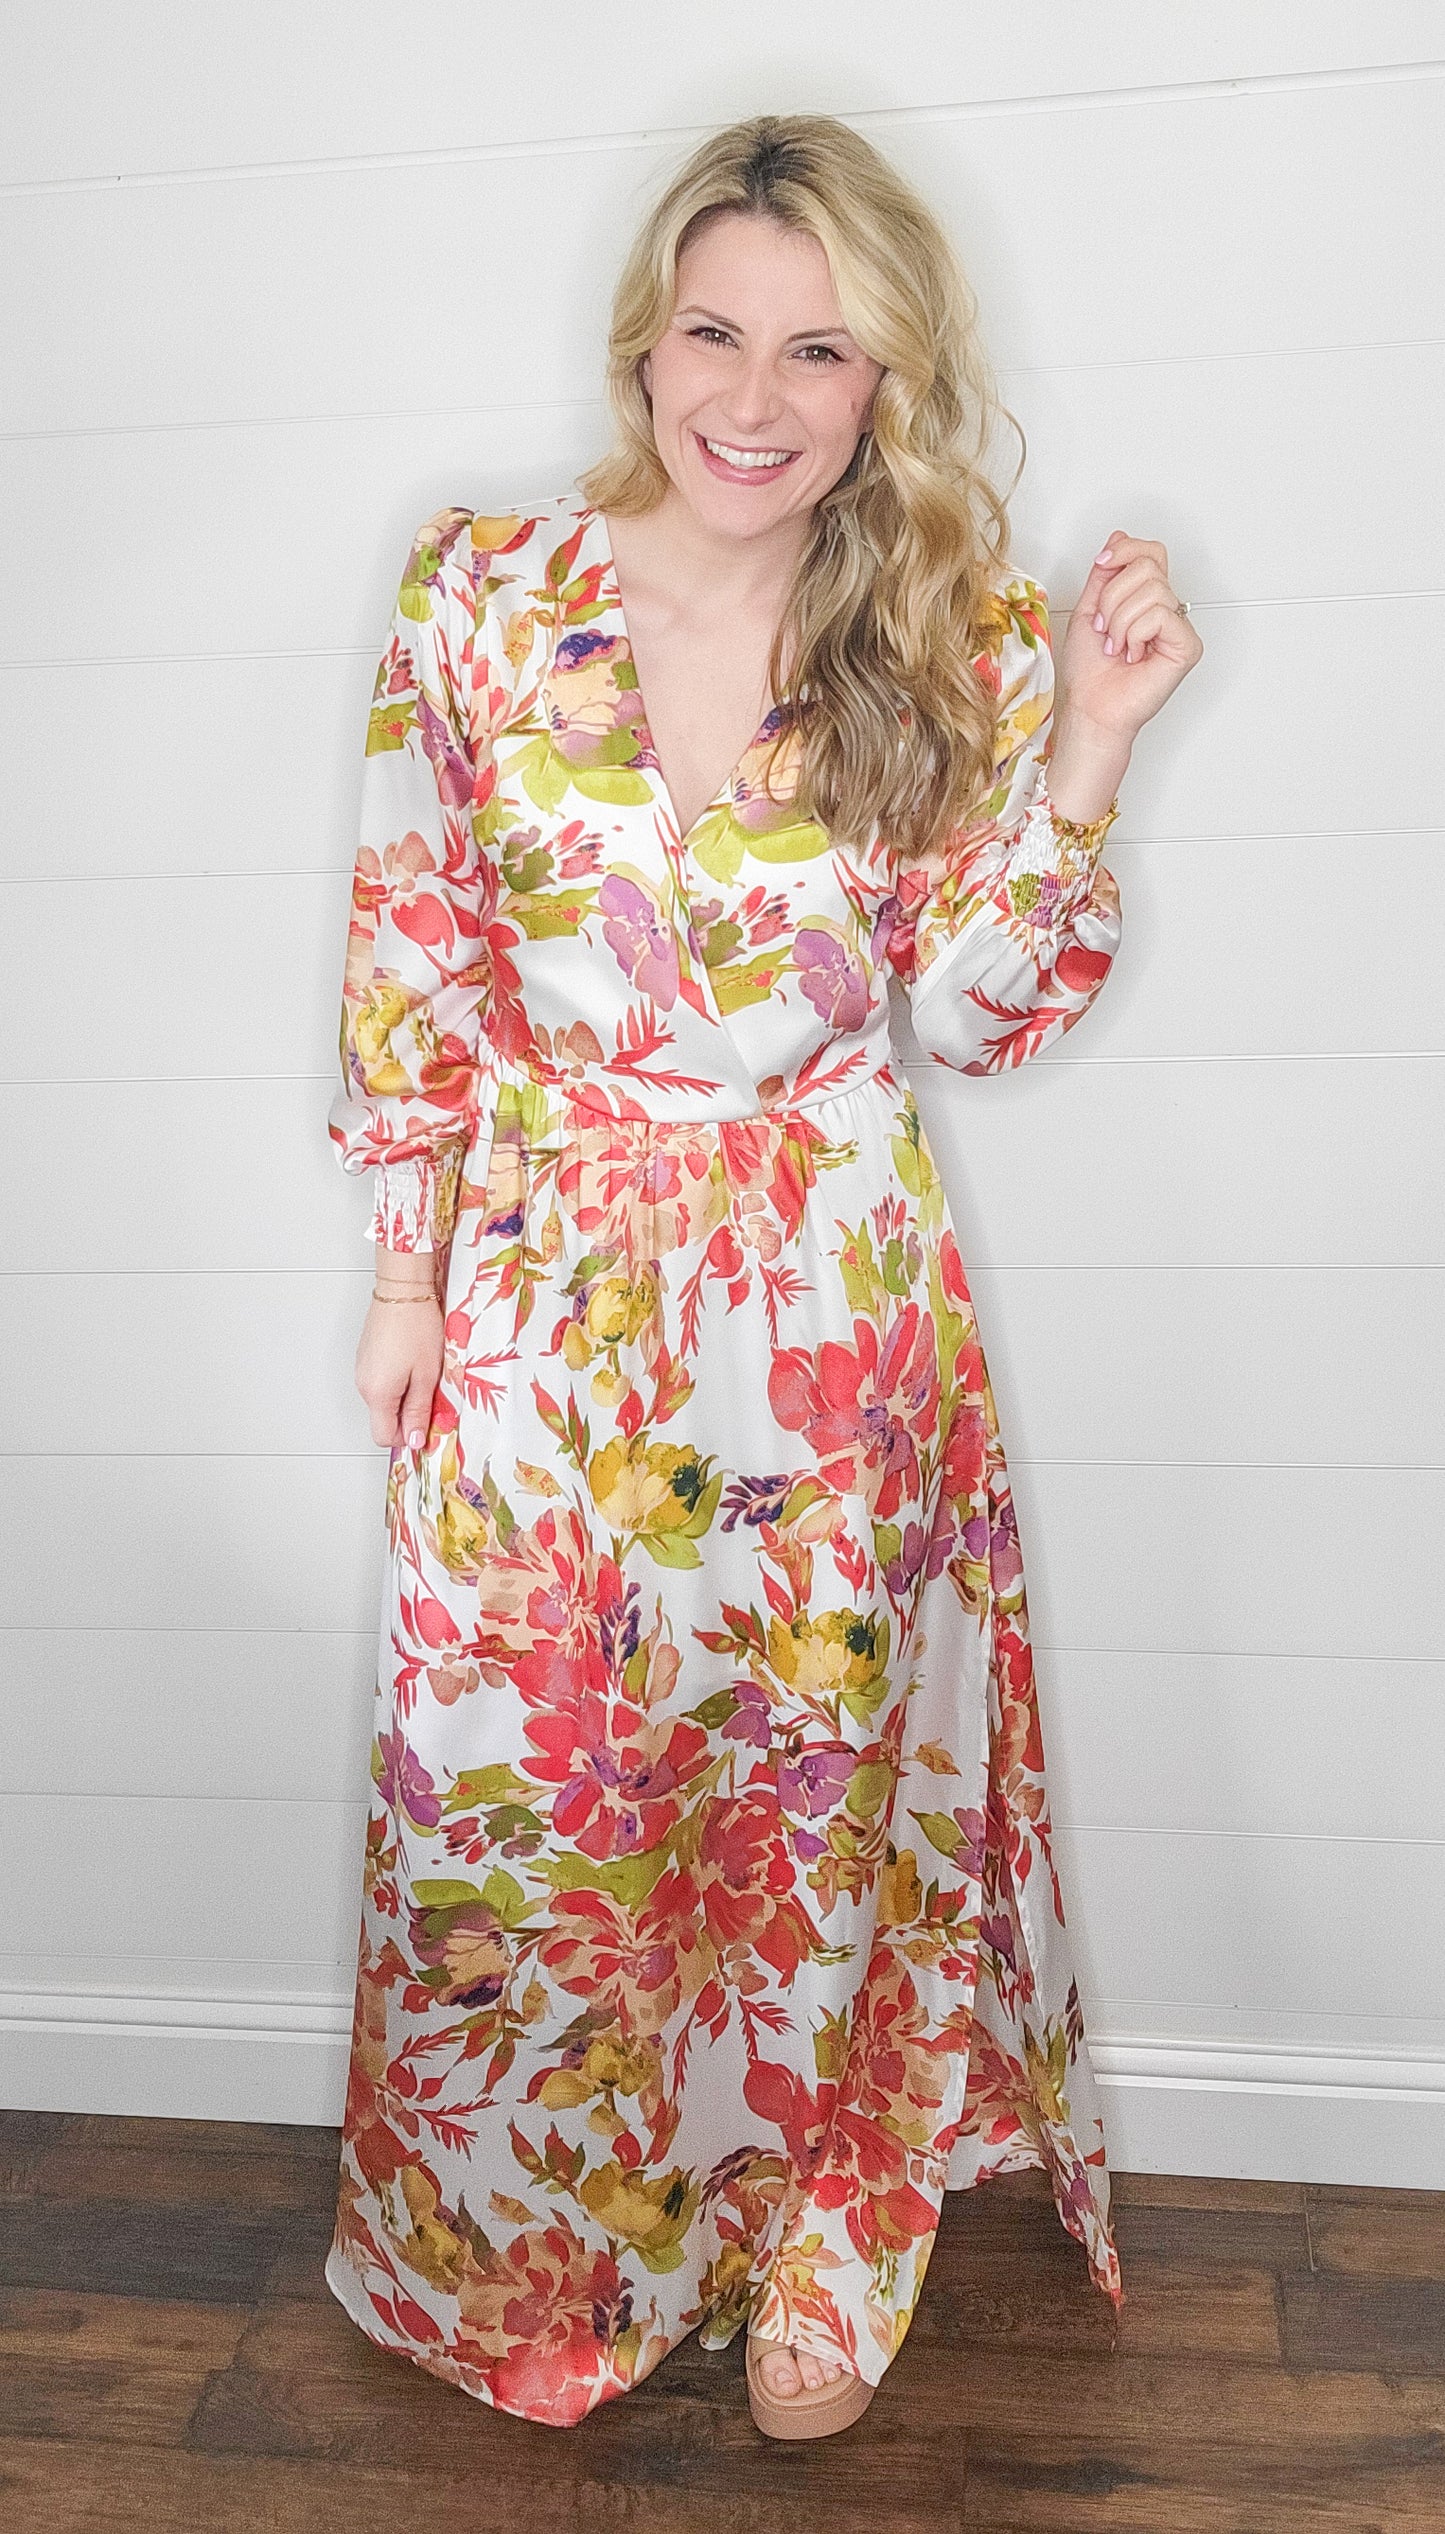 Power of Love Floral Printed Maxi Dress (Small to Large)